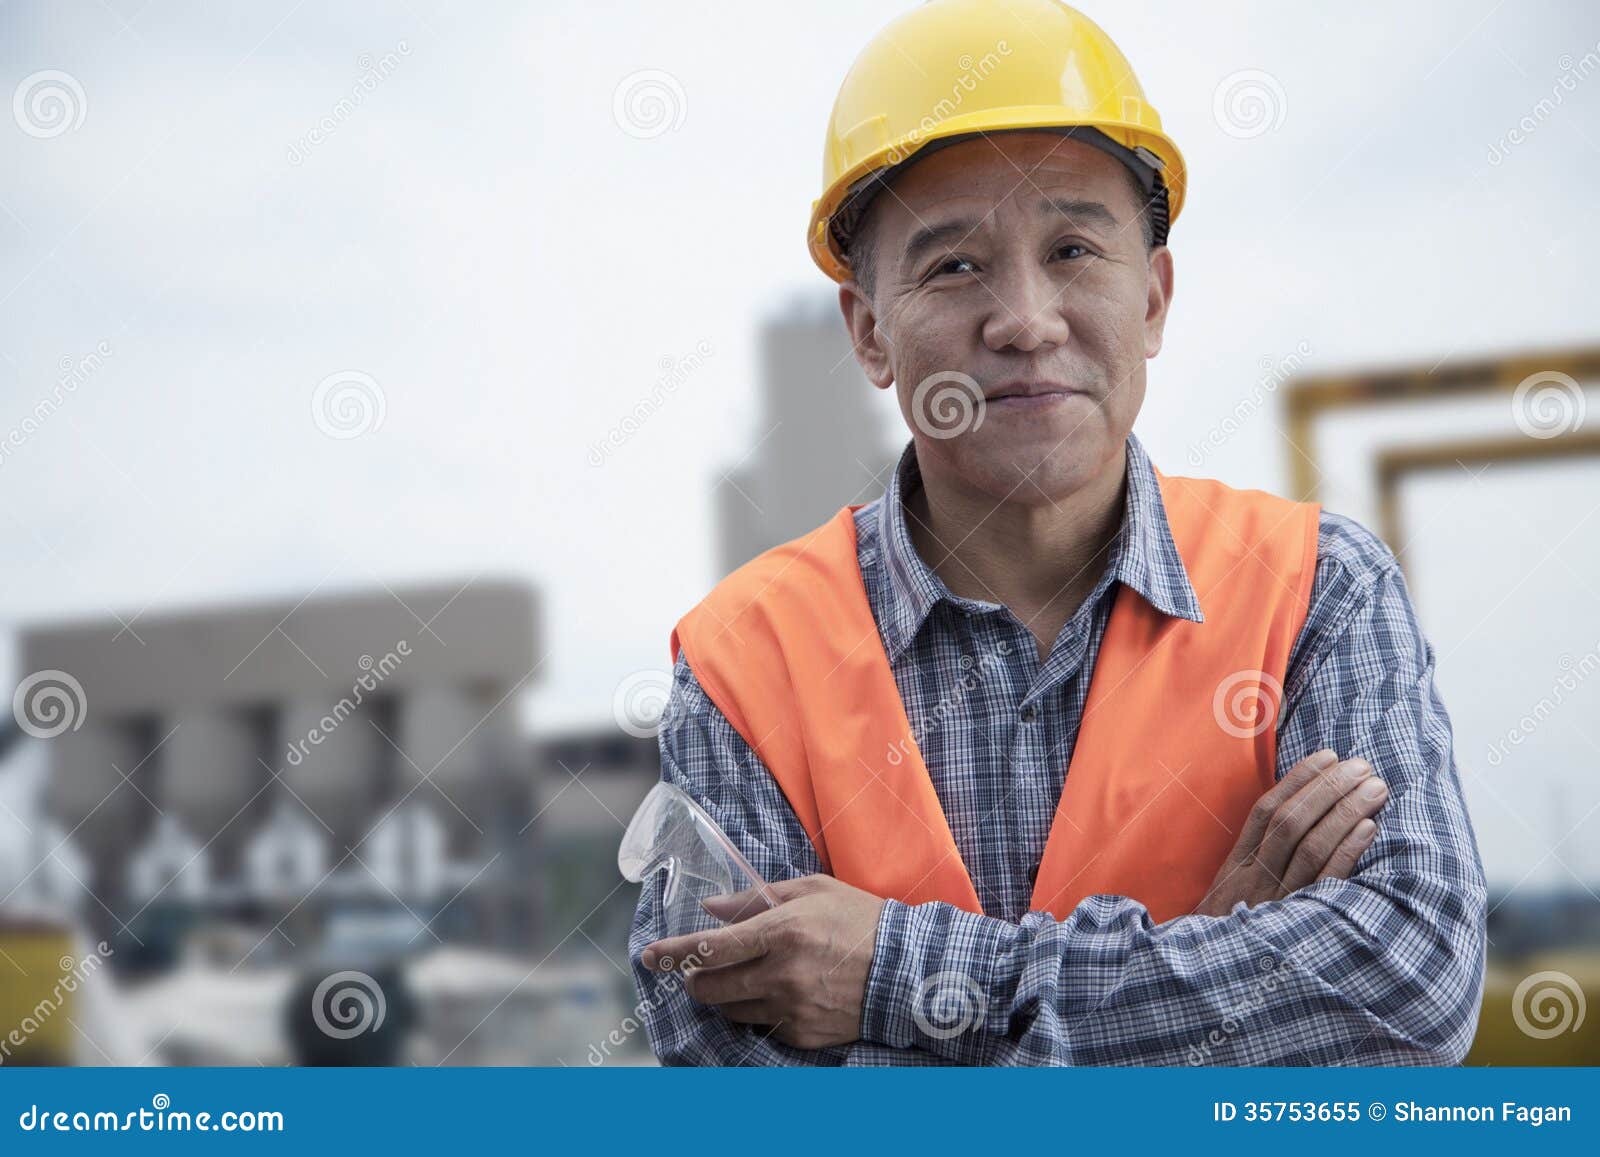 portrait of proud worker with arms crossed in protective workwear outside of a factory